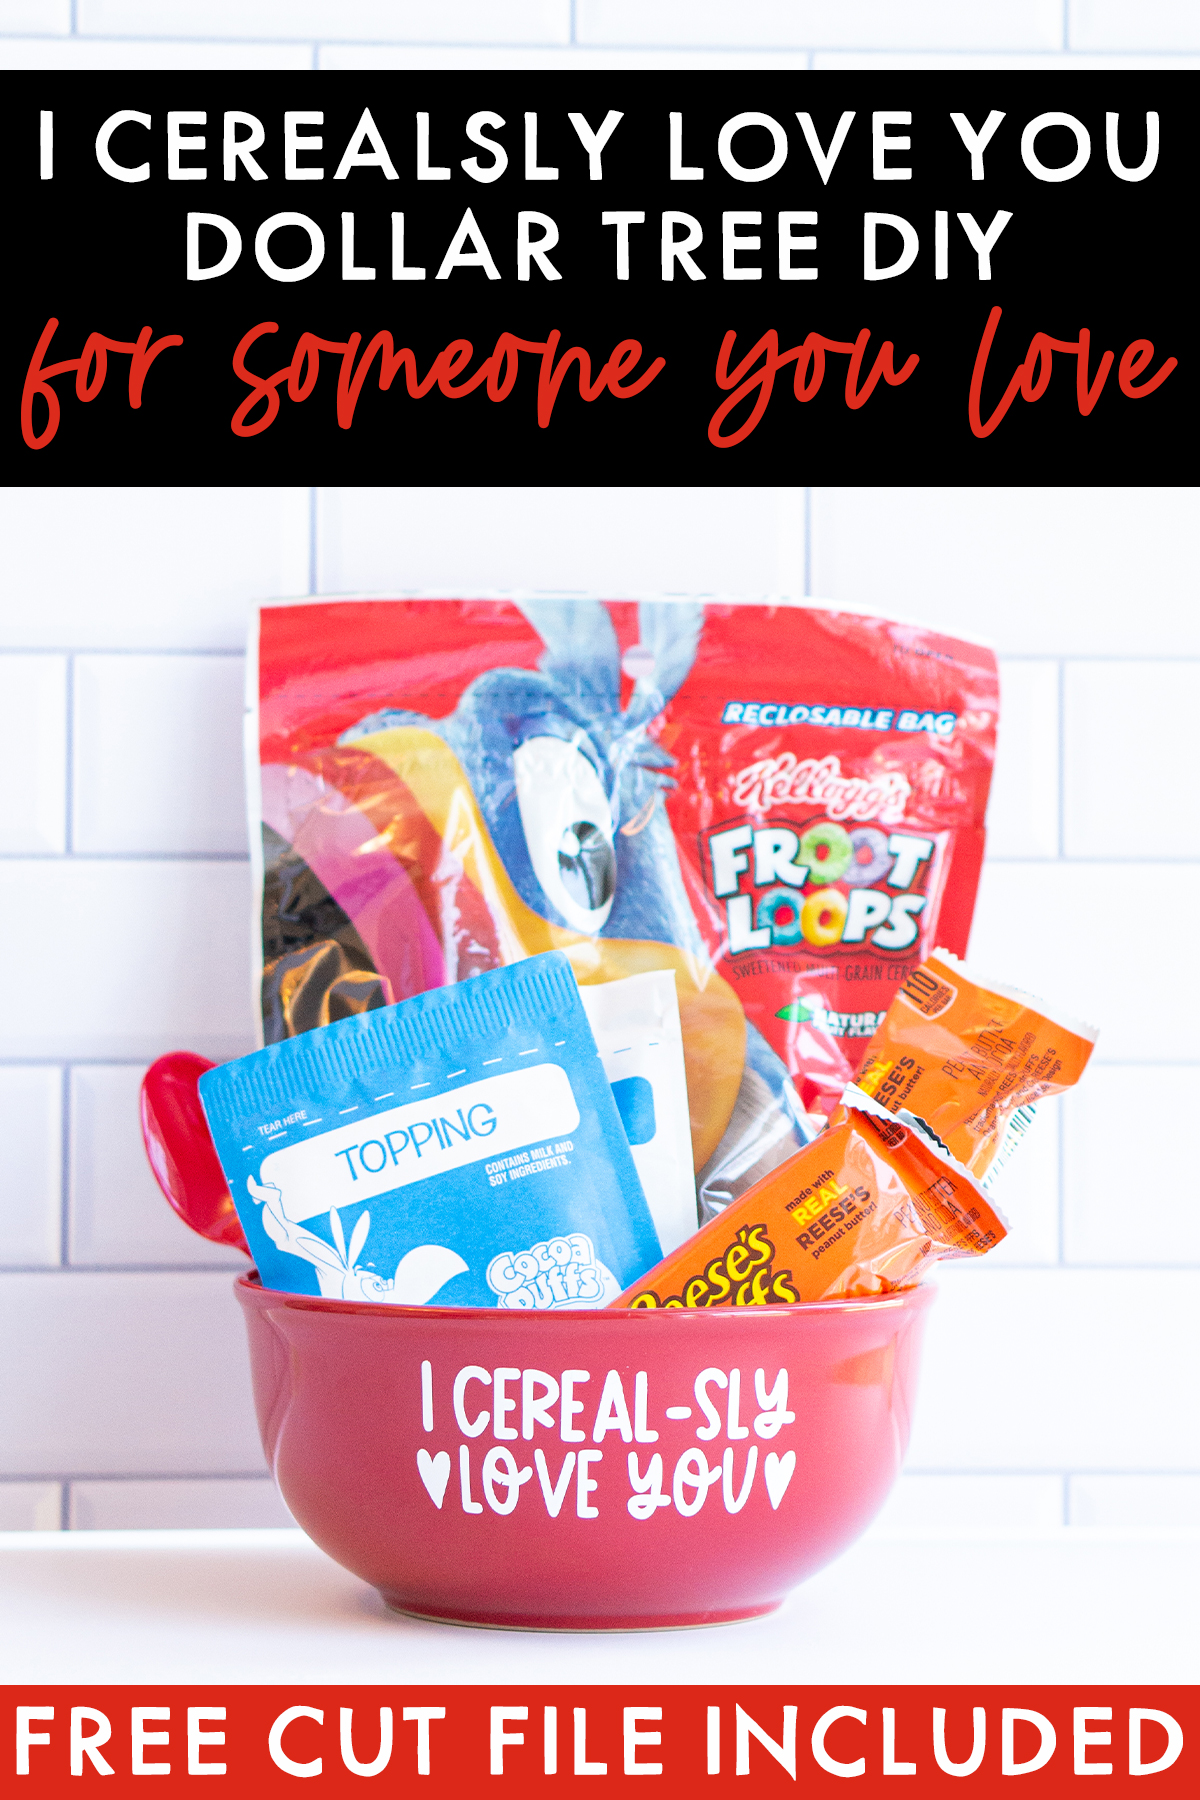 At the top the image says I cerealsly love you Dollar Tree DIY for someone you love. At the bottom it says, free cut file included. In the middle is an image that shows the I cerealsly love you SVG applied to a red cereal bowl. The bowl has a bag of cereal, two cereal bars, a bag of oatmeal, and a red spoon sitting inside of it.